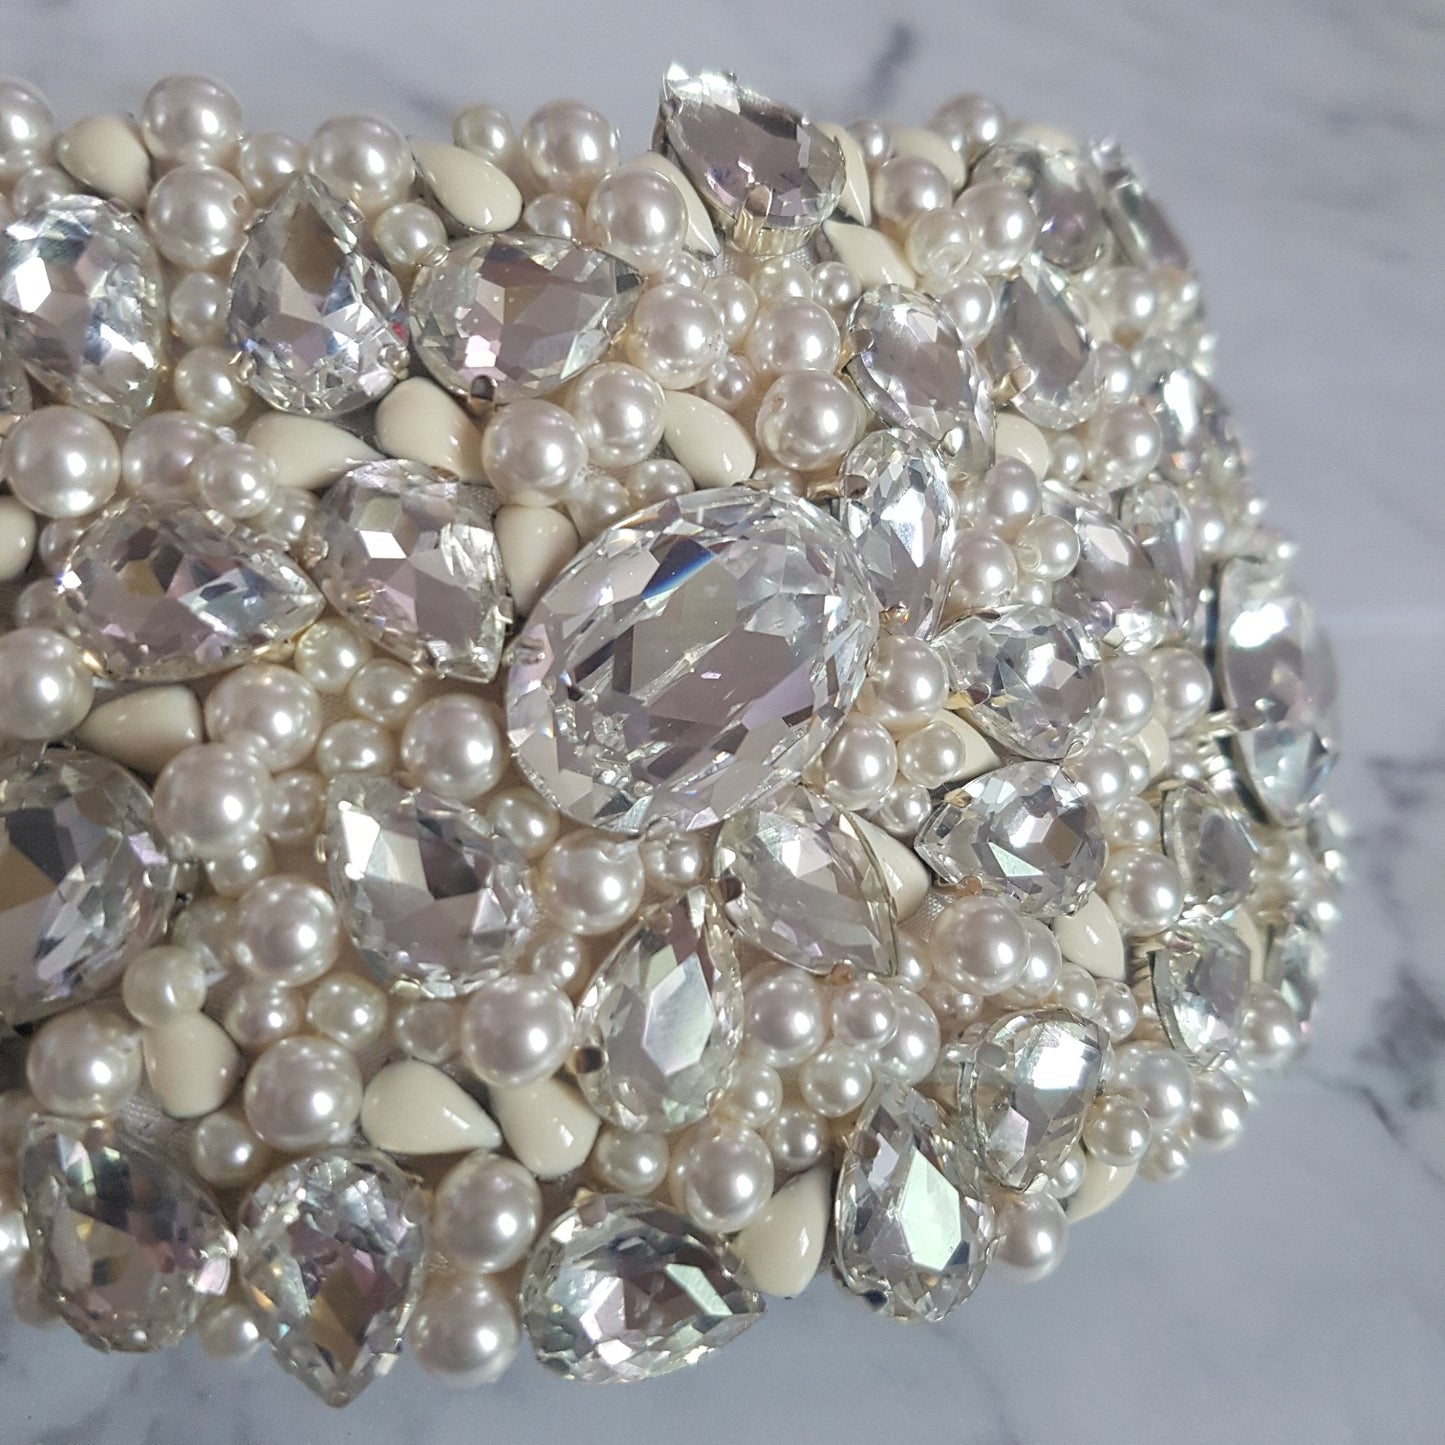 Aria Crystal and Pearl Headpiece